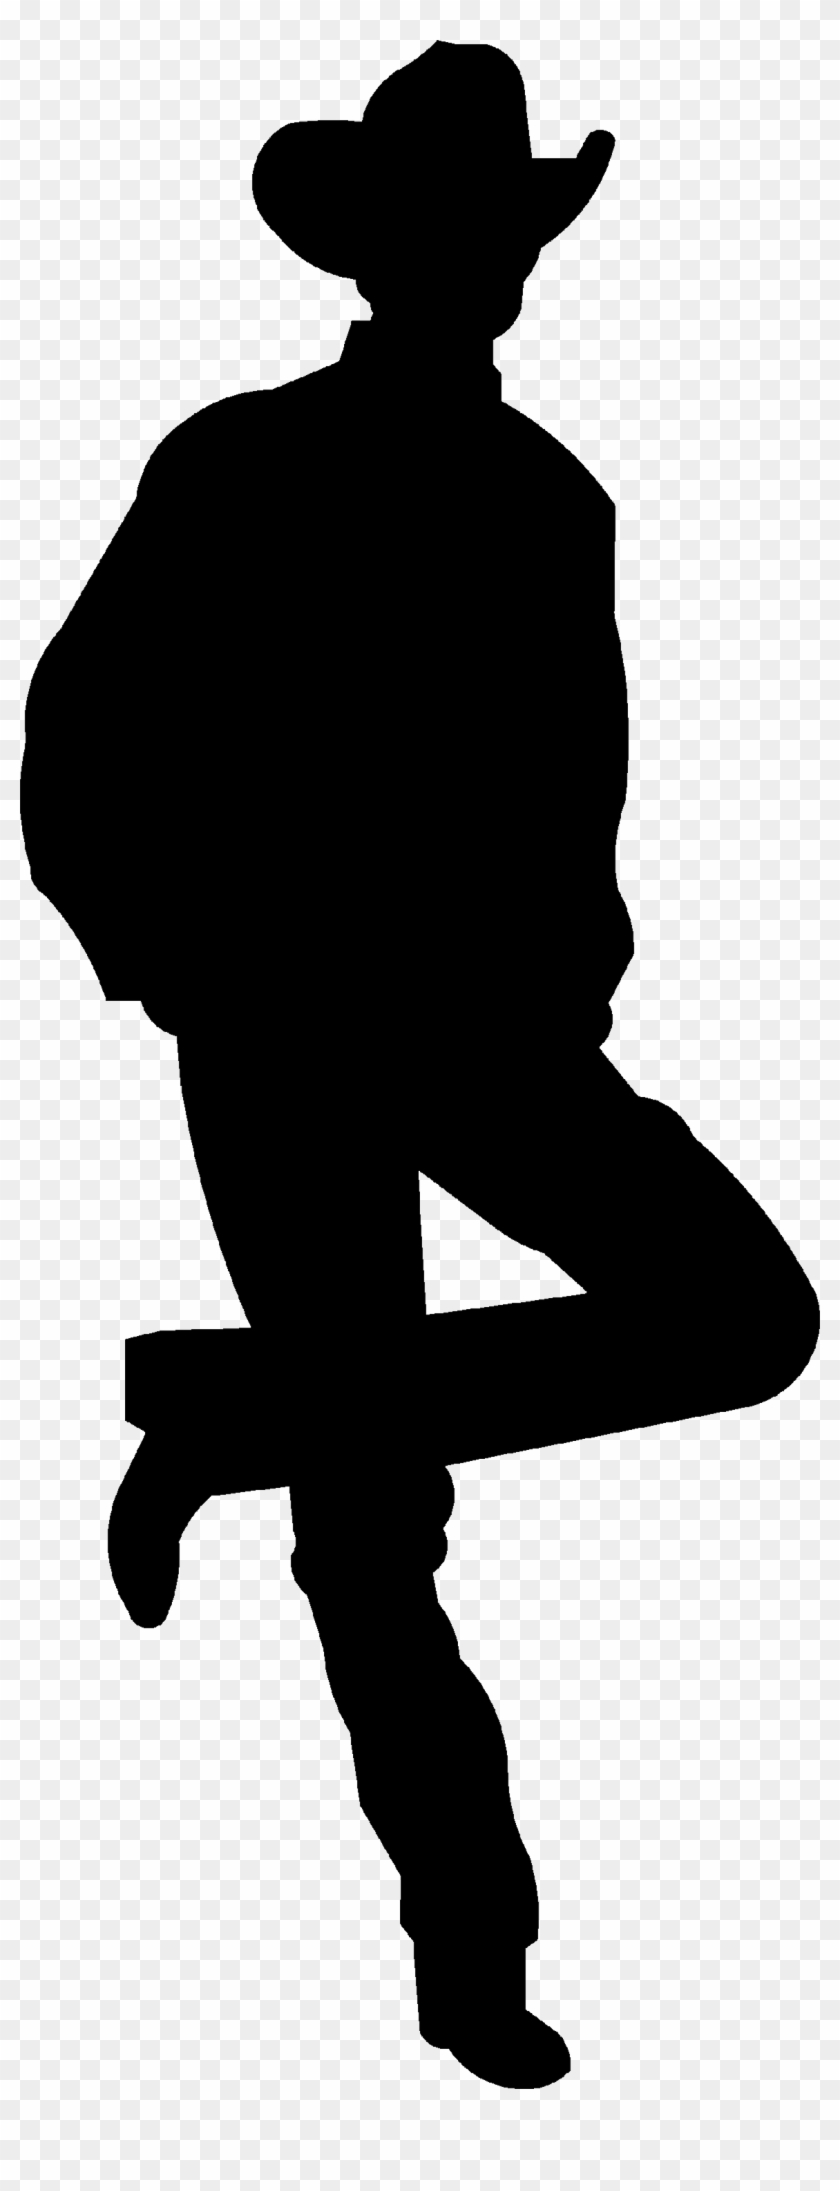 Cowboy Silhouette Png - Witch Silhouette #363865